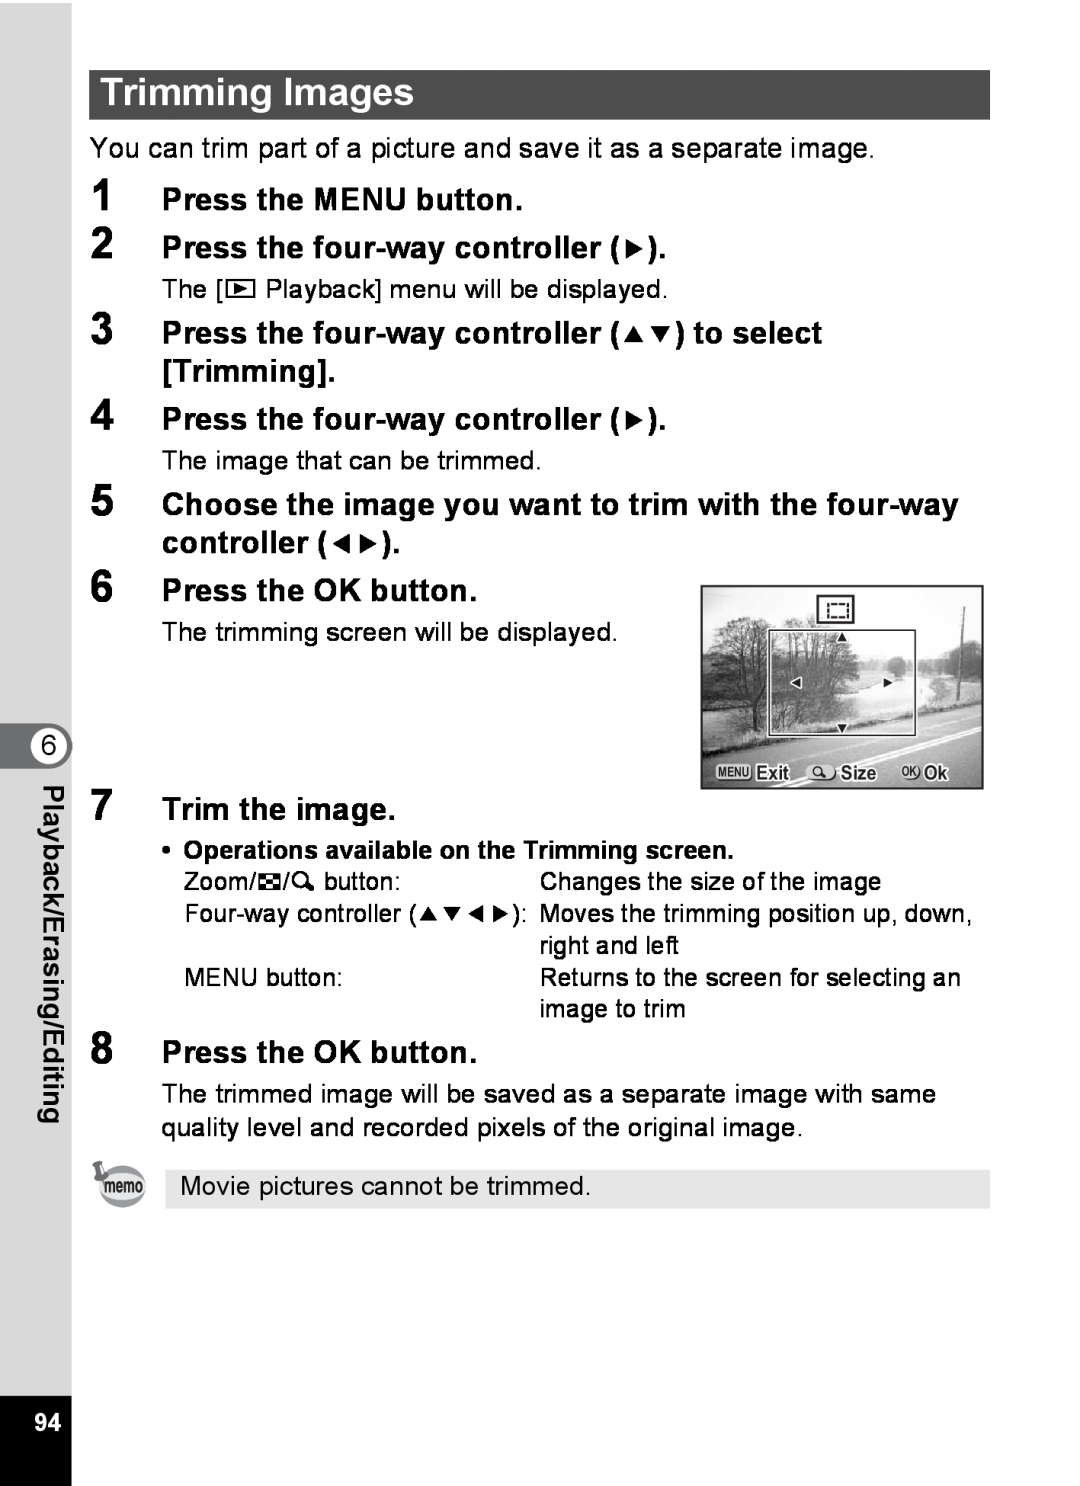 Pentax S4 manual Trimming Images, Press the four-way controller 23 to select Trimming, Trim the image, Press the OK button 